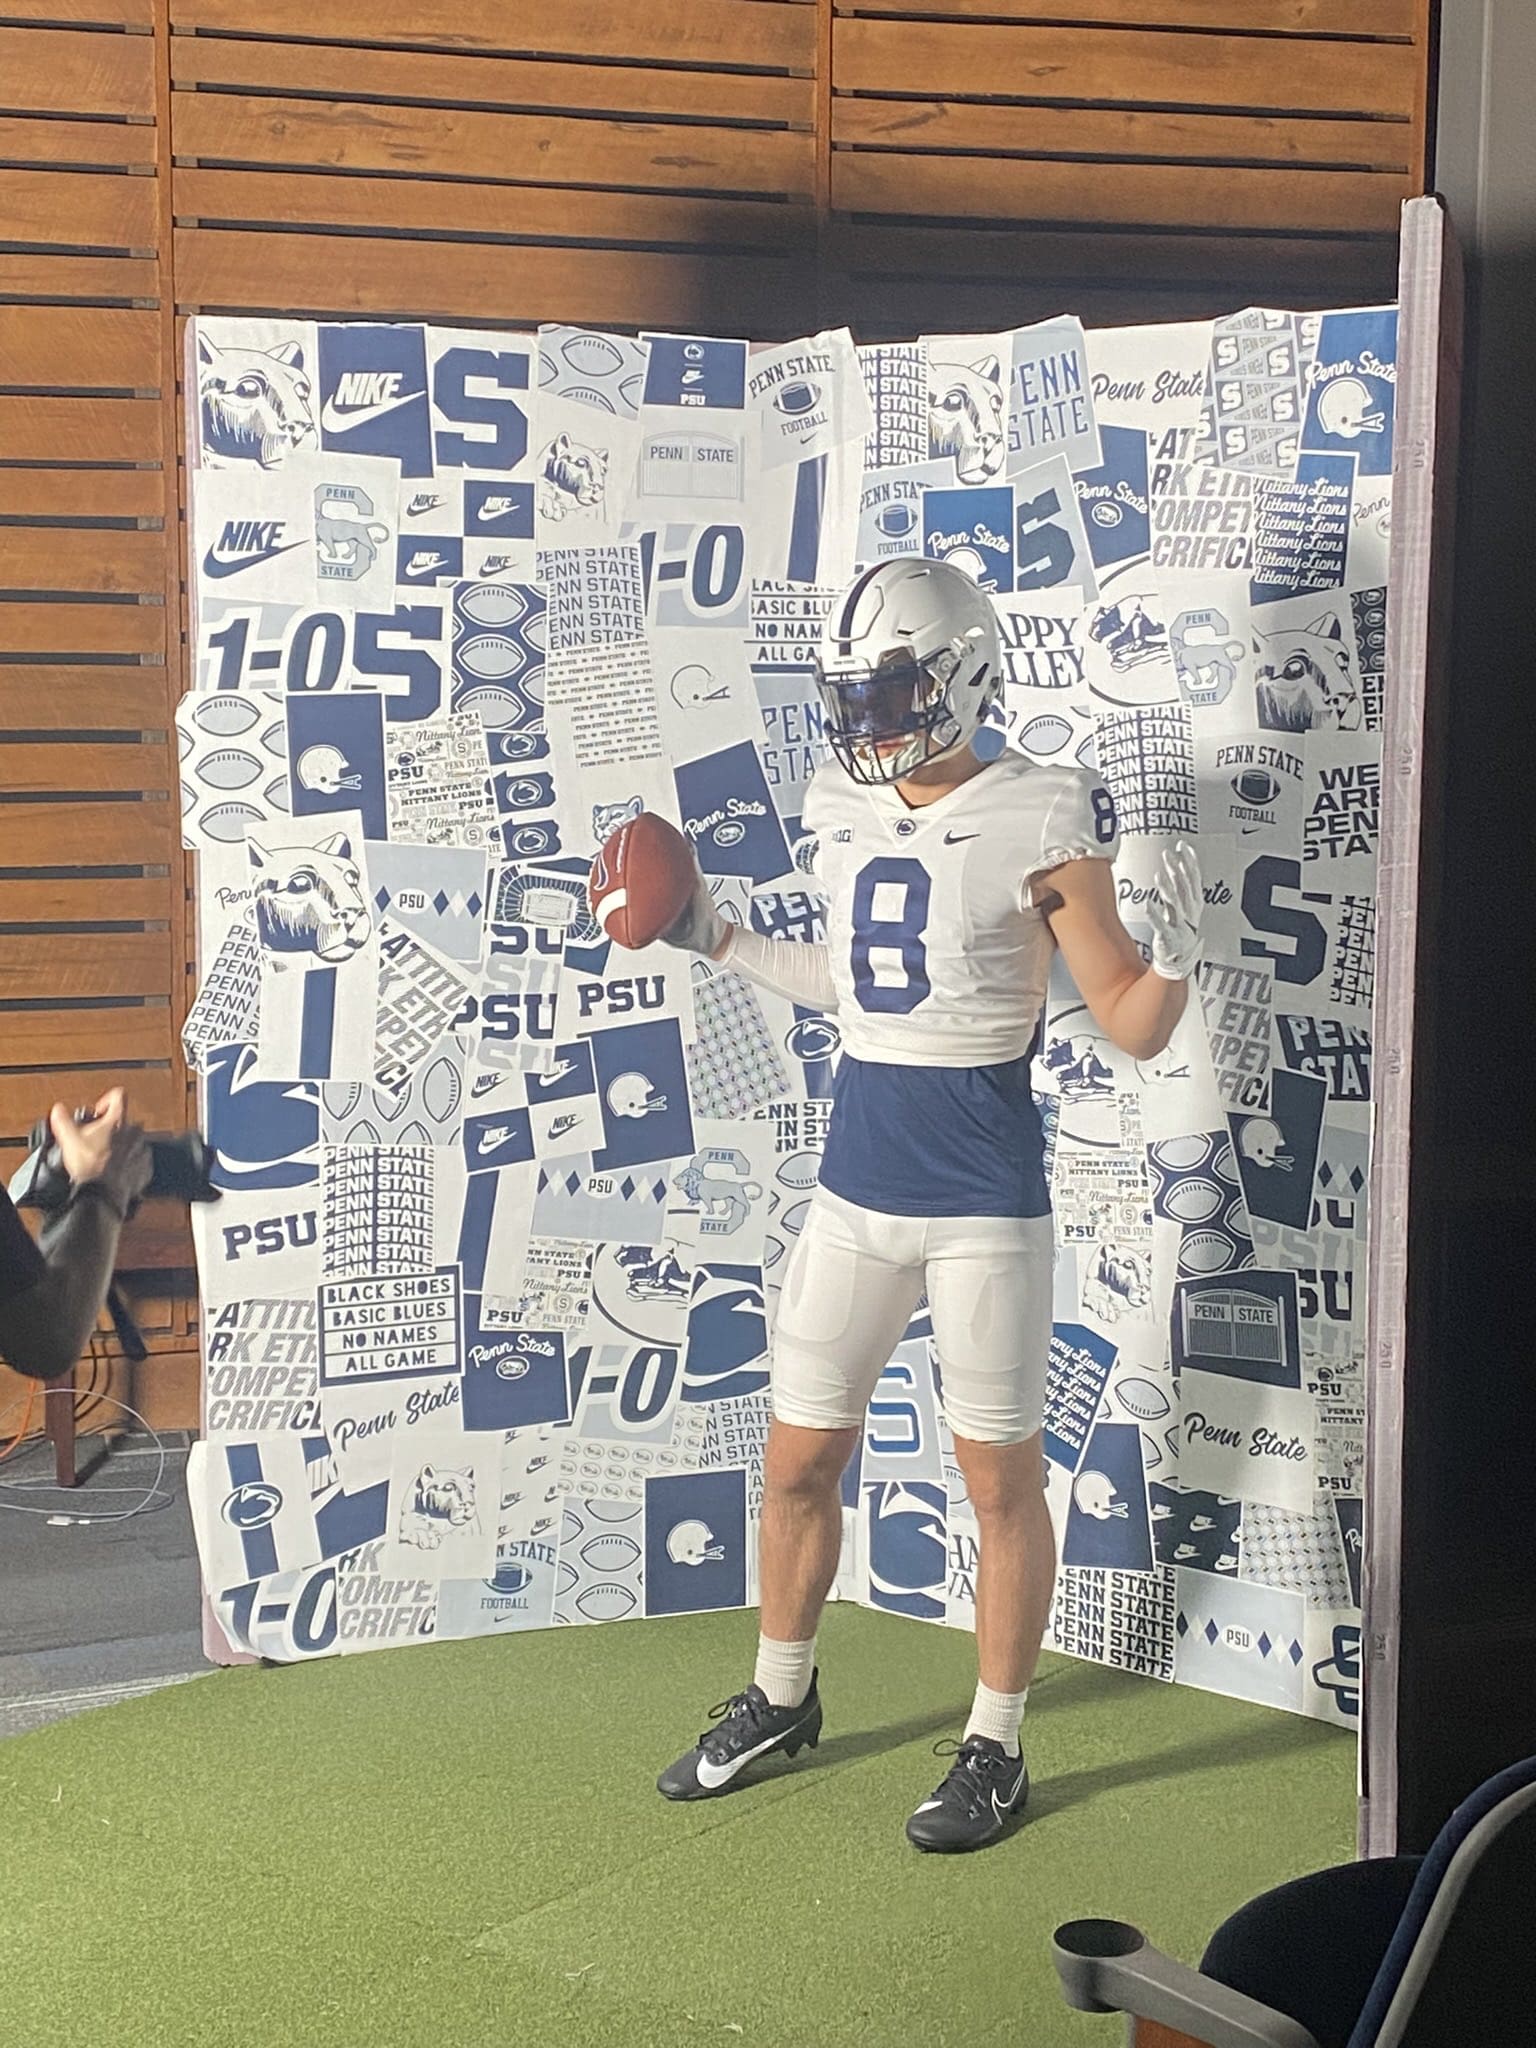 No. 2 player in PA chooses Michigan over PSU